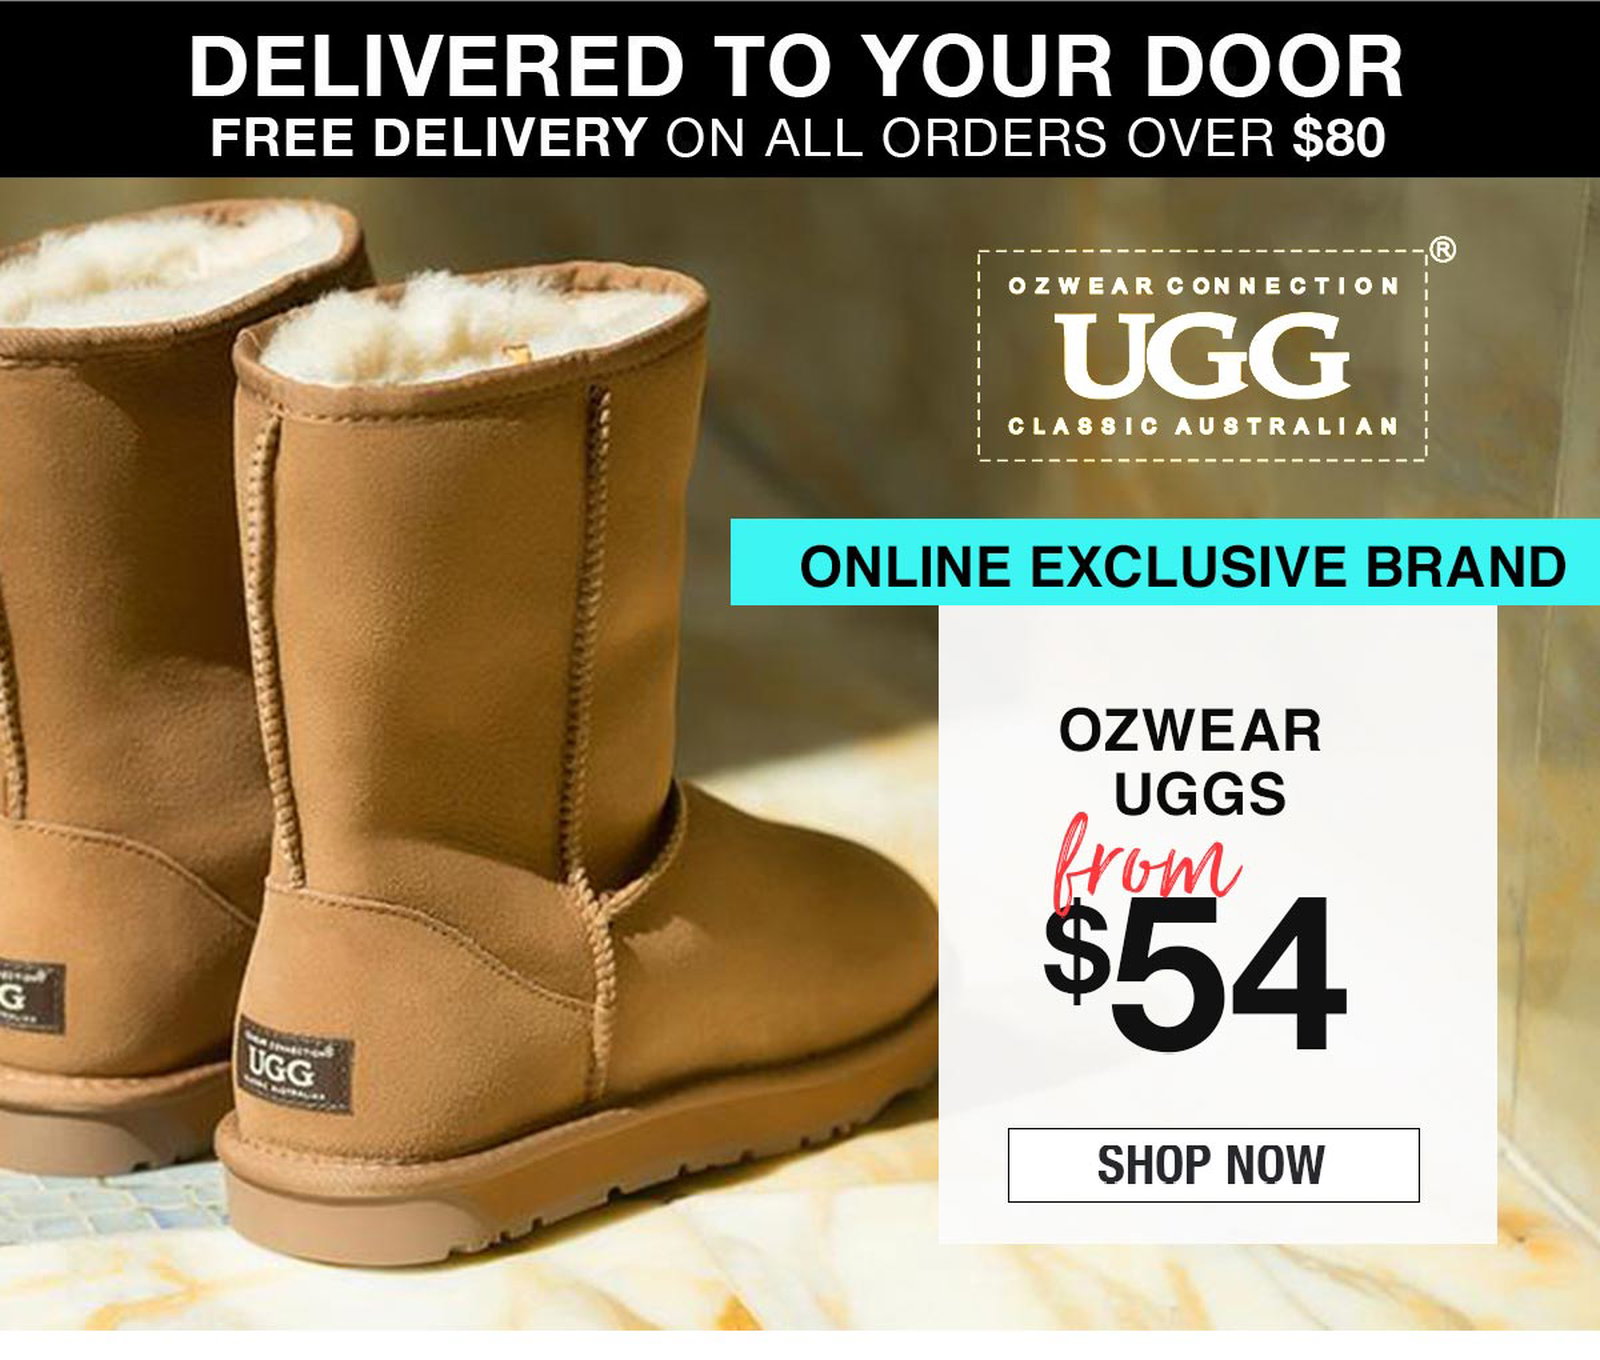 rivers ugg boots